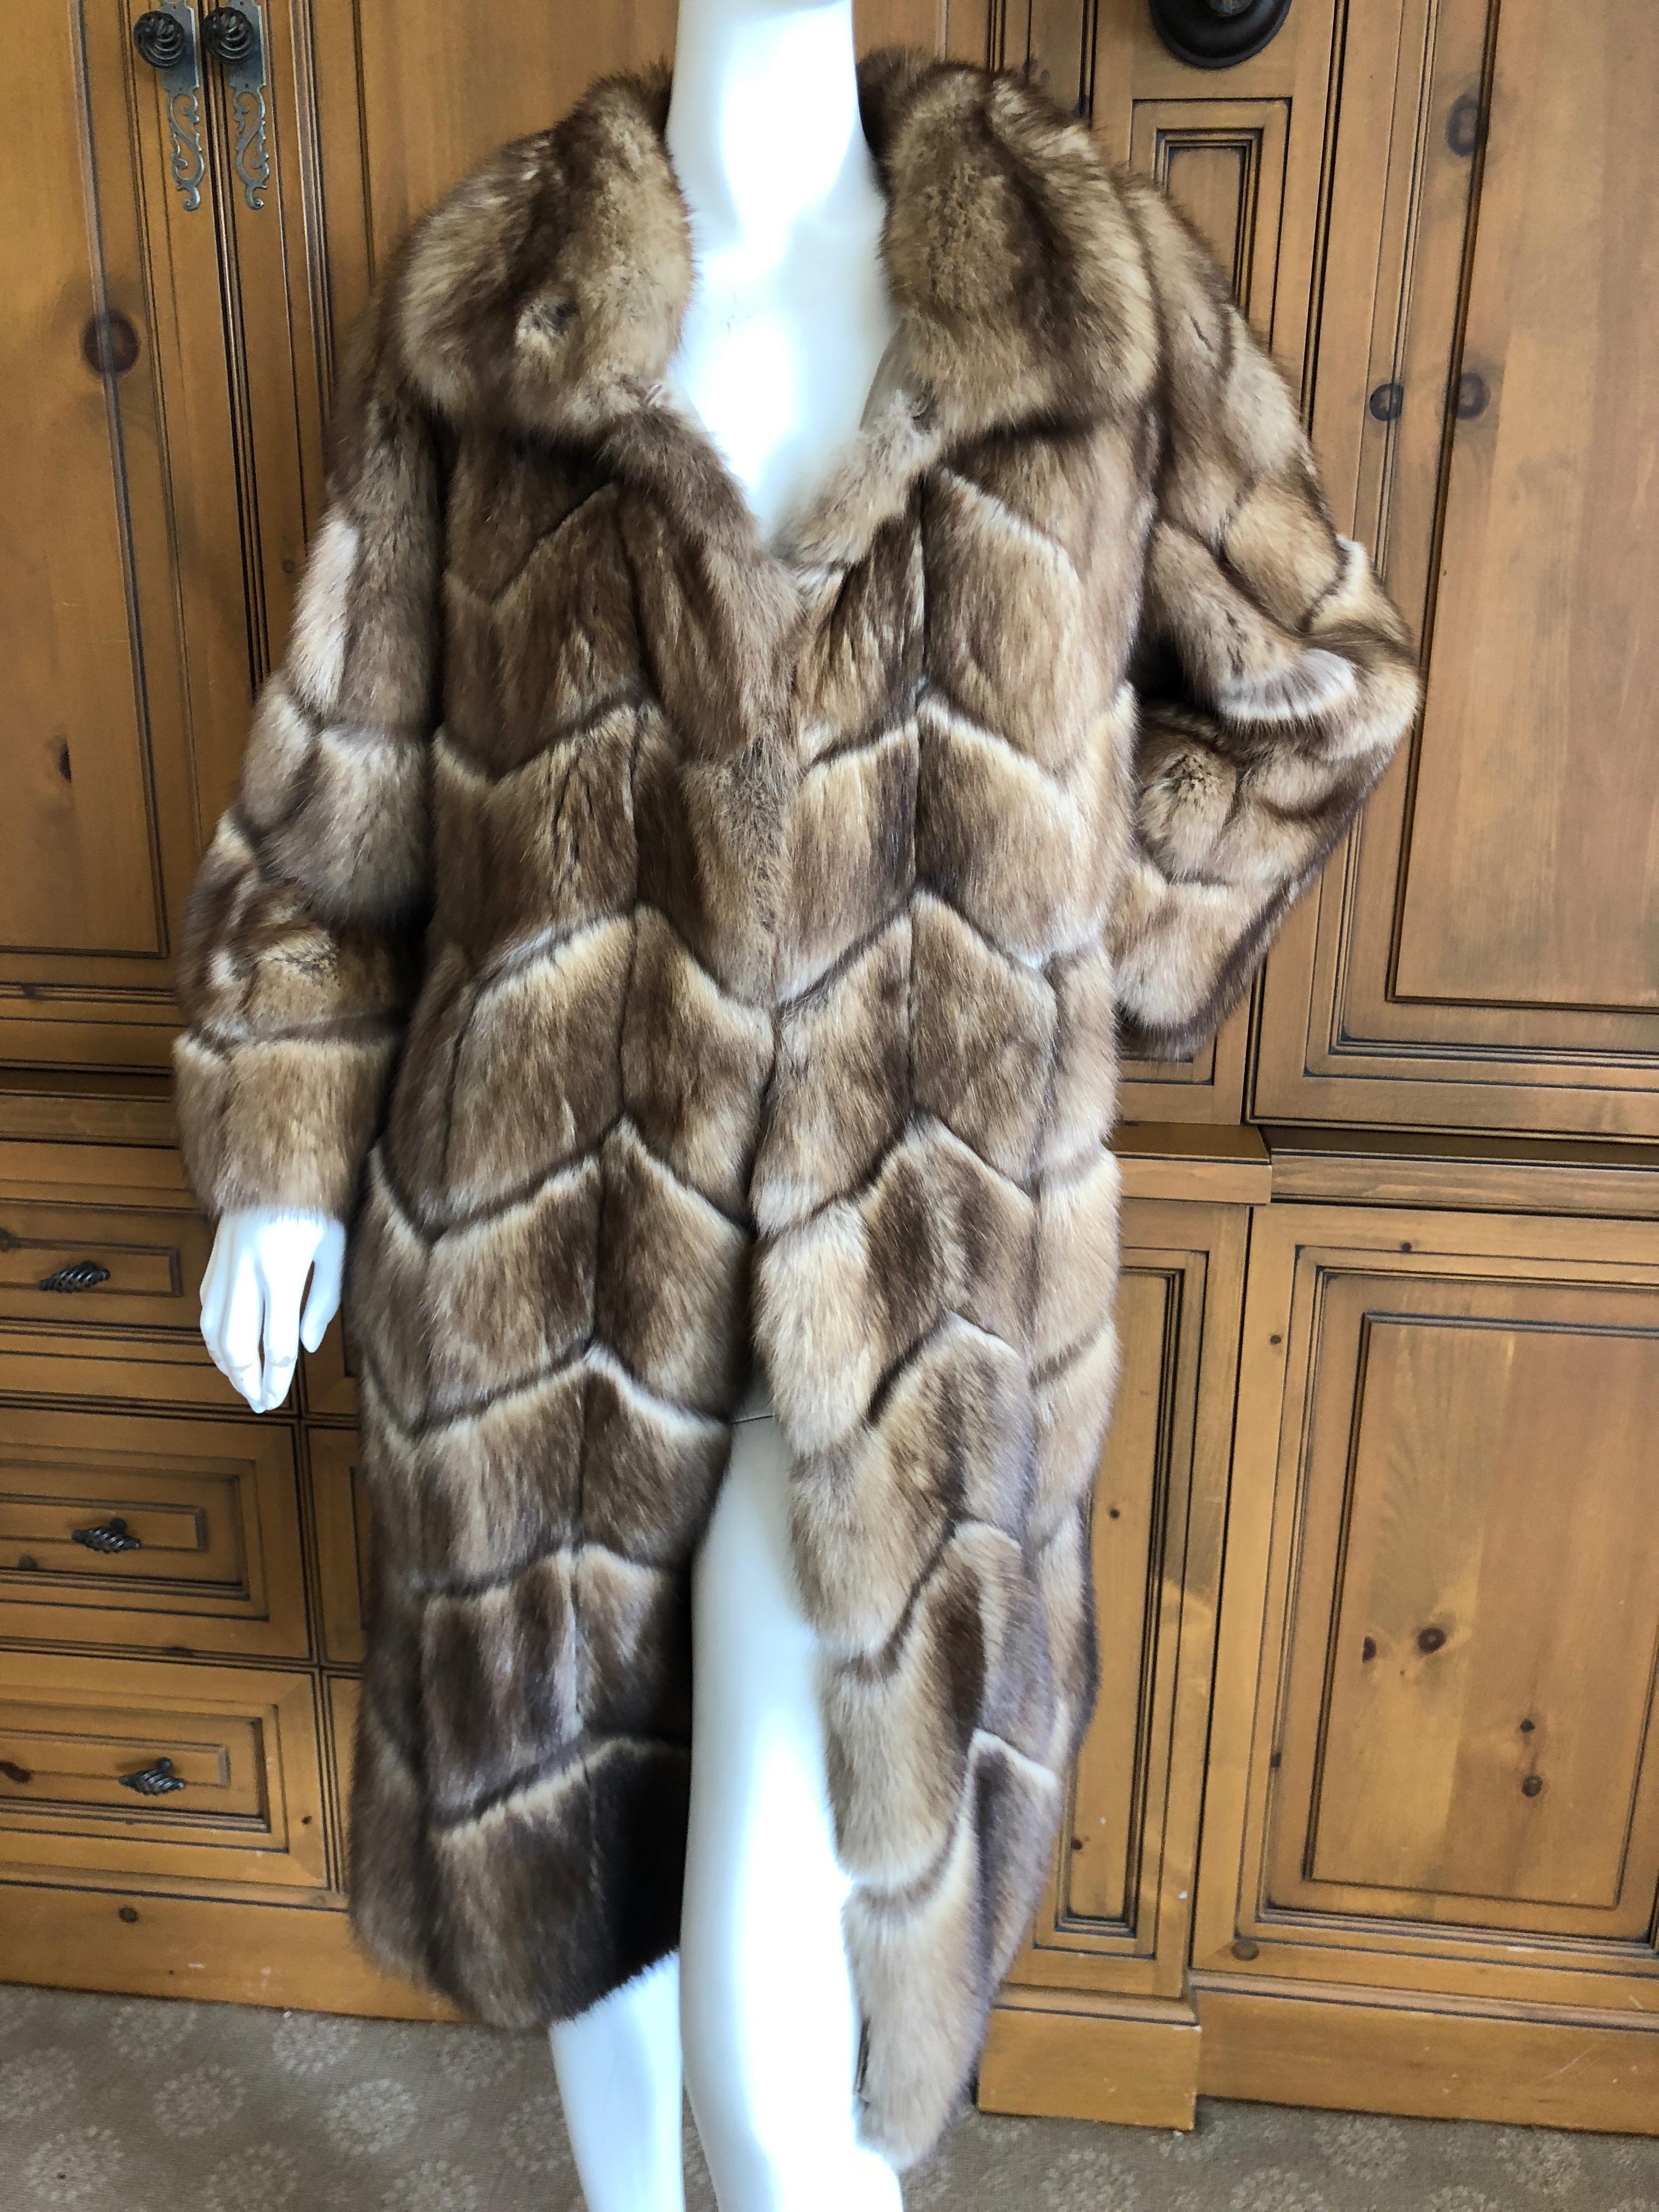 J. Mendel Golden Sable Chevron Pattern Fur Coat from Neiman Marcus.
Lined in silk , this is very lightweight
The pelts are luxurious and soft. there are no shoulder pads.

Four large fur closure hook into rings to keep it closed.


Bust 40